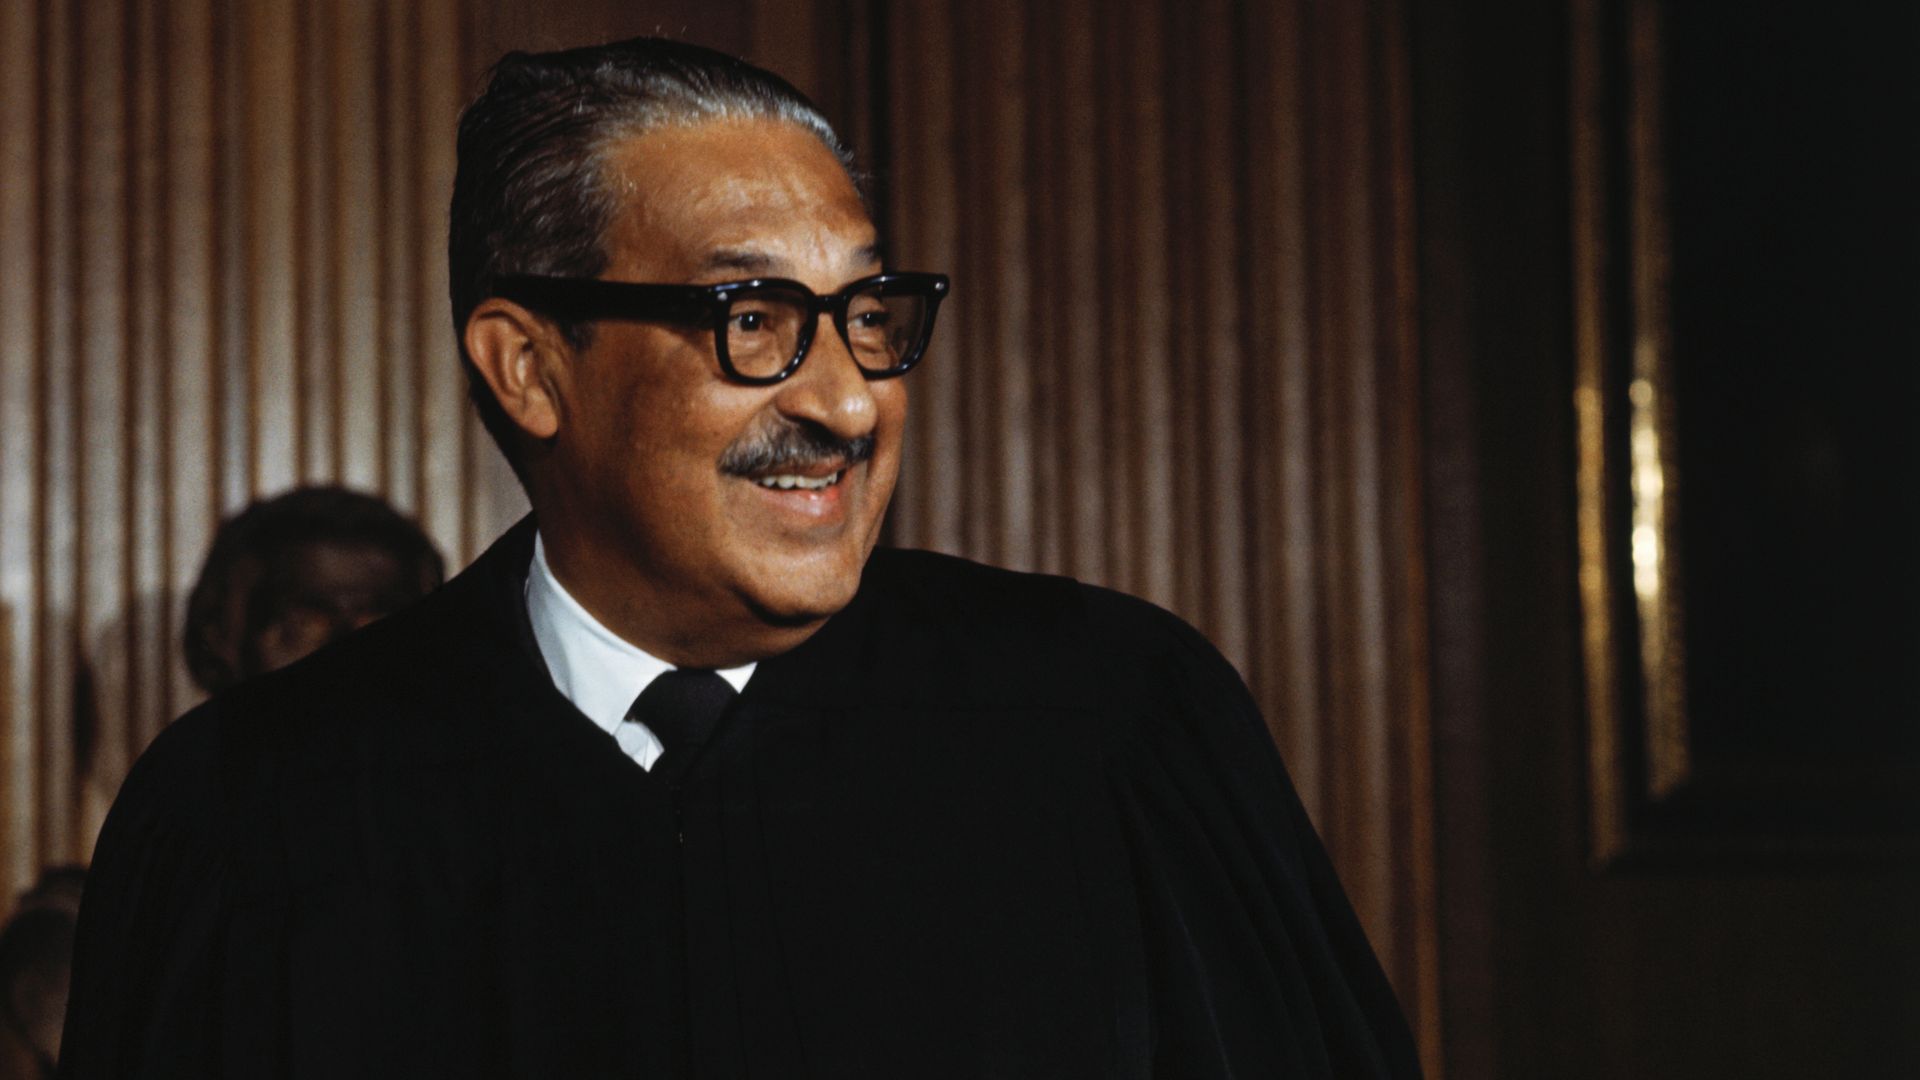 Thurgood Marshall in his robe prior to being sworn in as the first Black member of the U. S. Supreme Court in 1967.